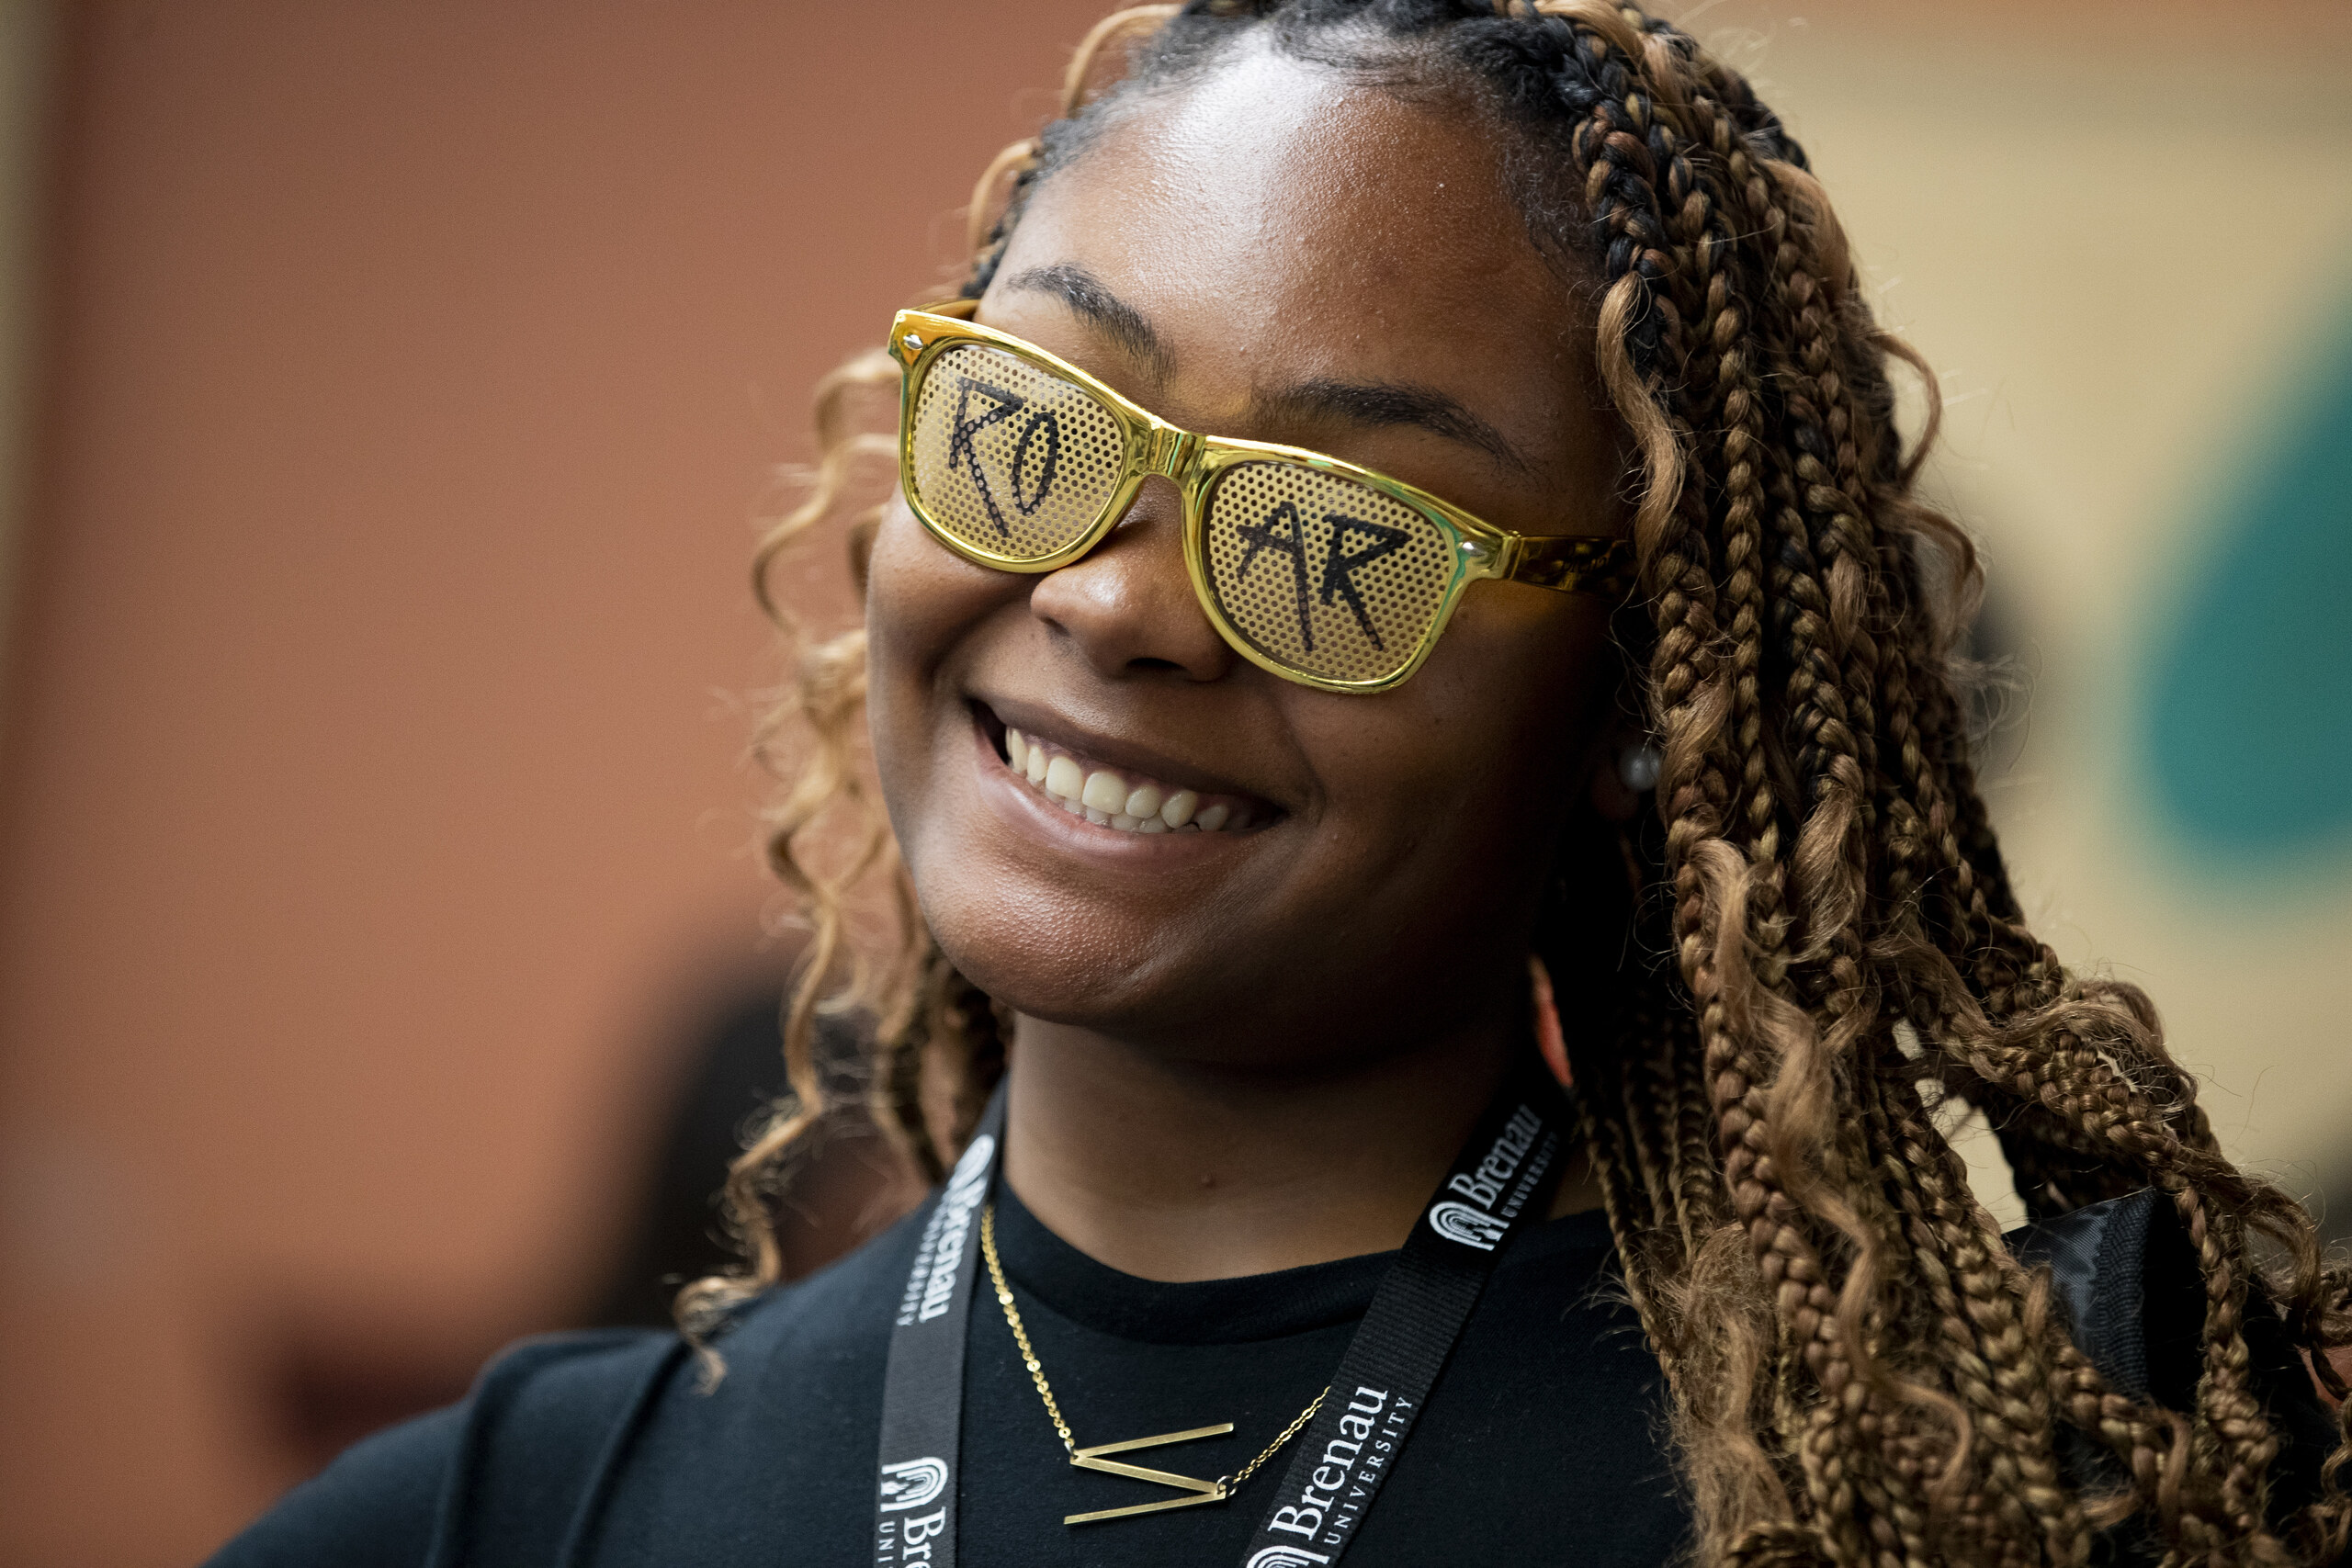 A student wears specialty sunglasses with the ROAR logo on the lenses